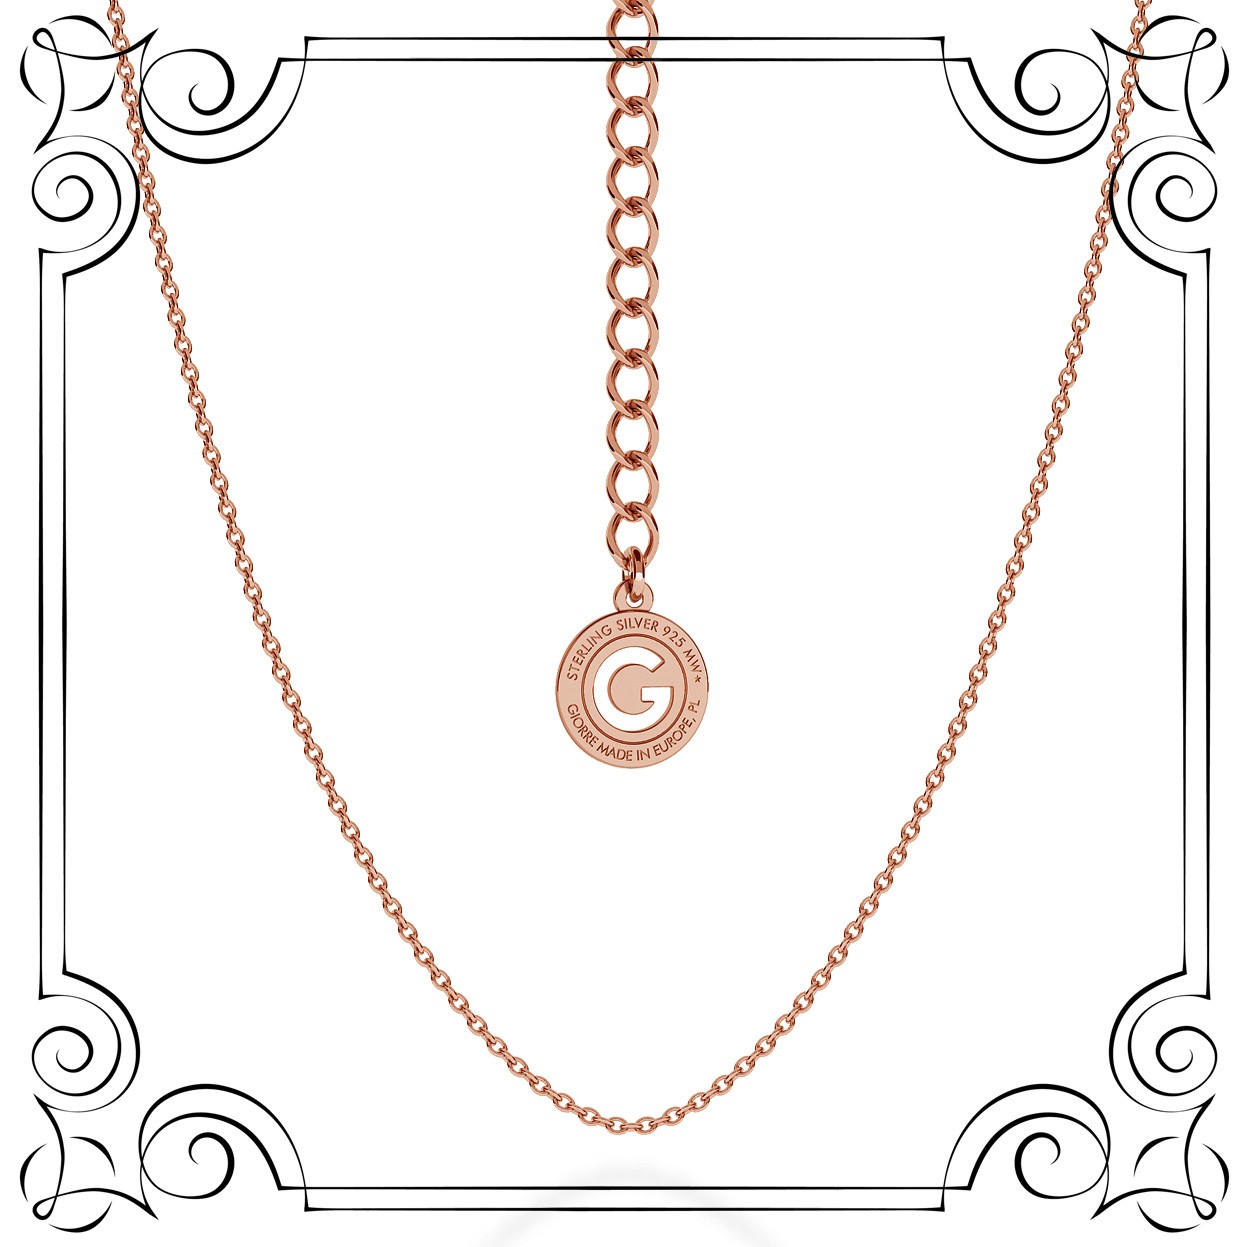 LIGHT SILVER NECKLACE 55 CM, GOLD PLATED (PINK GOLD)